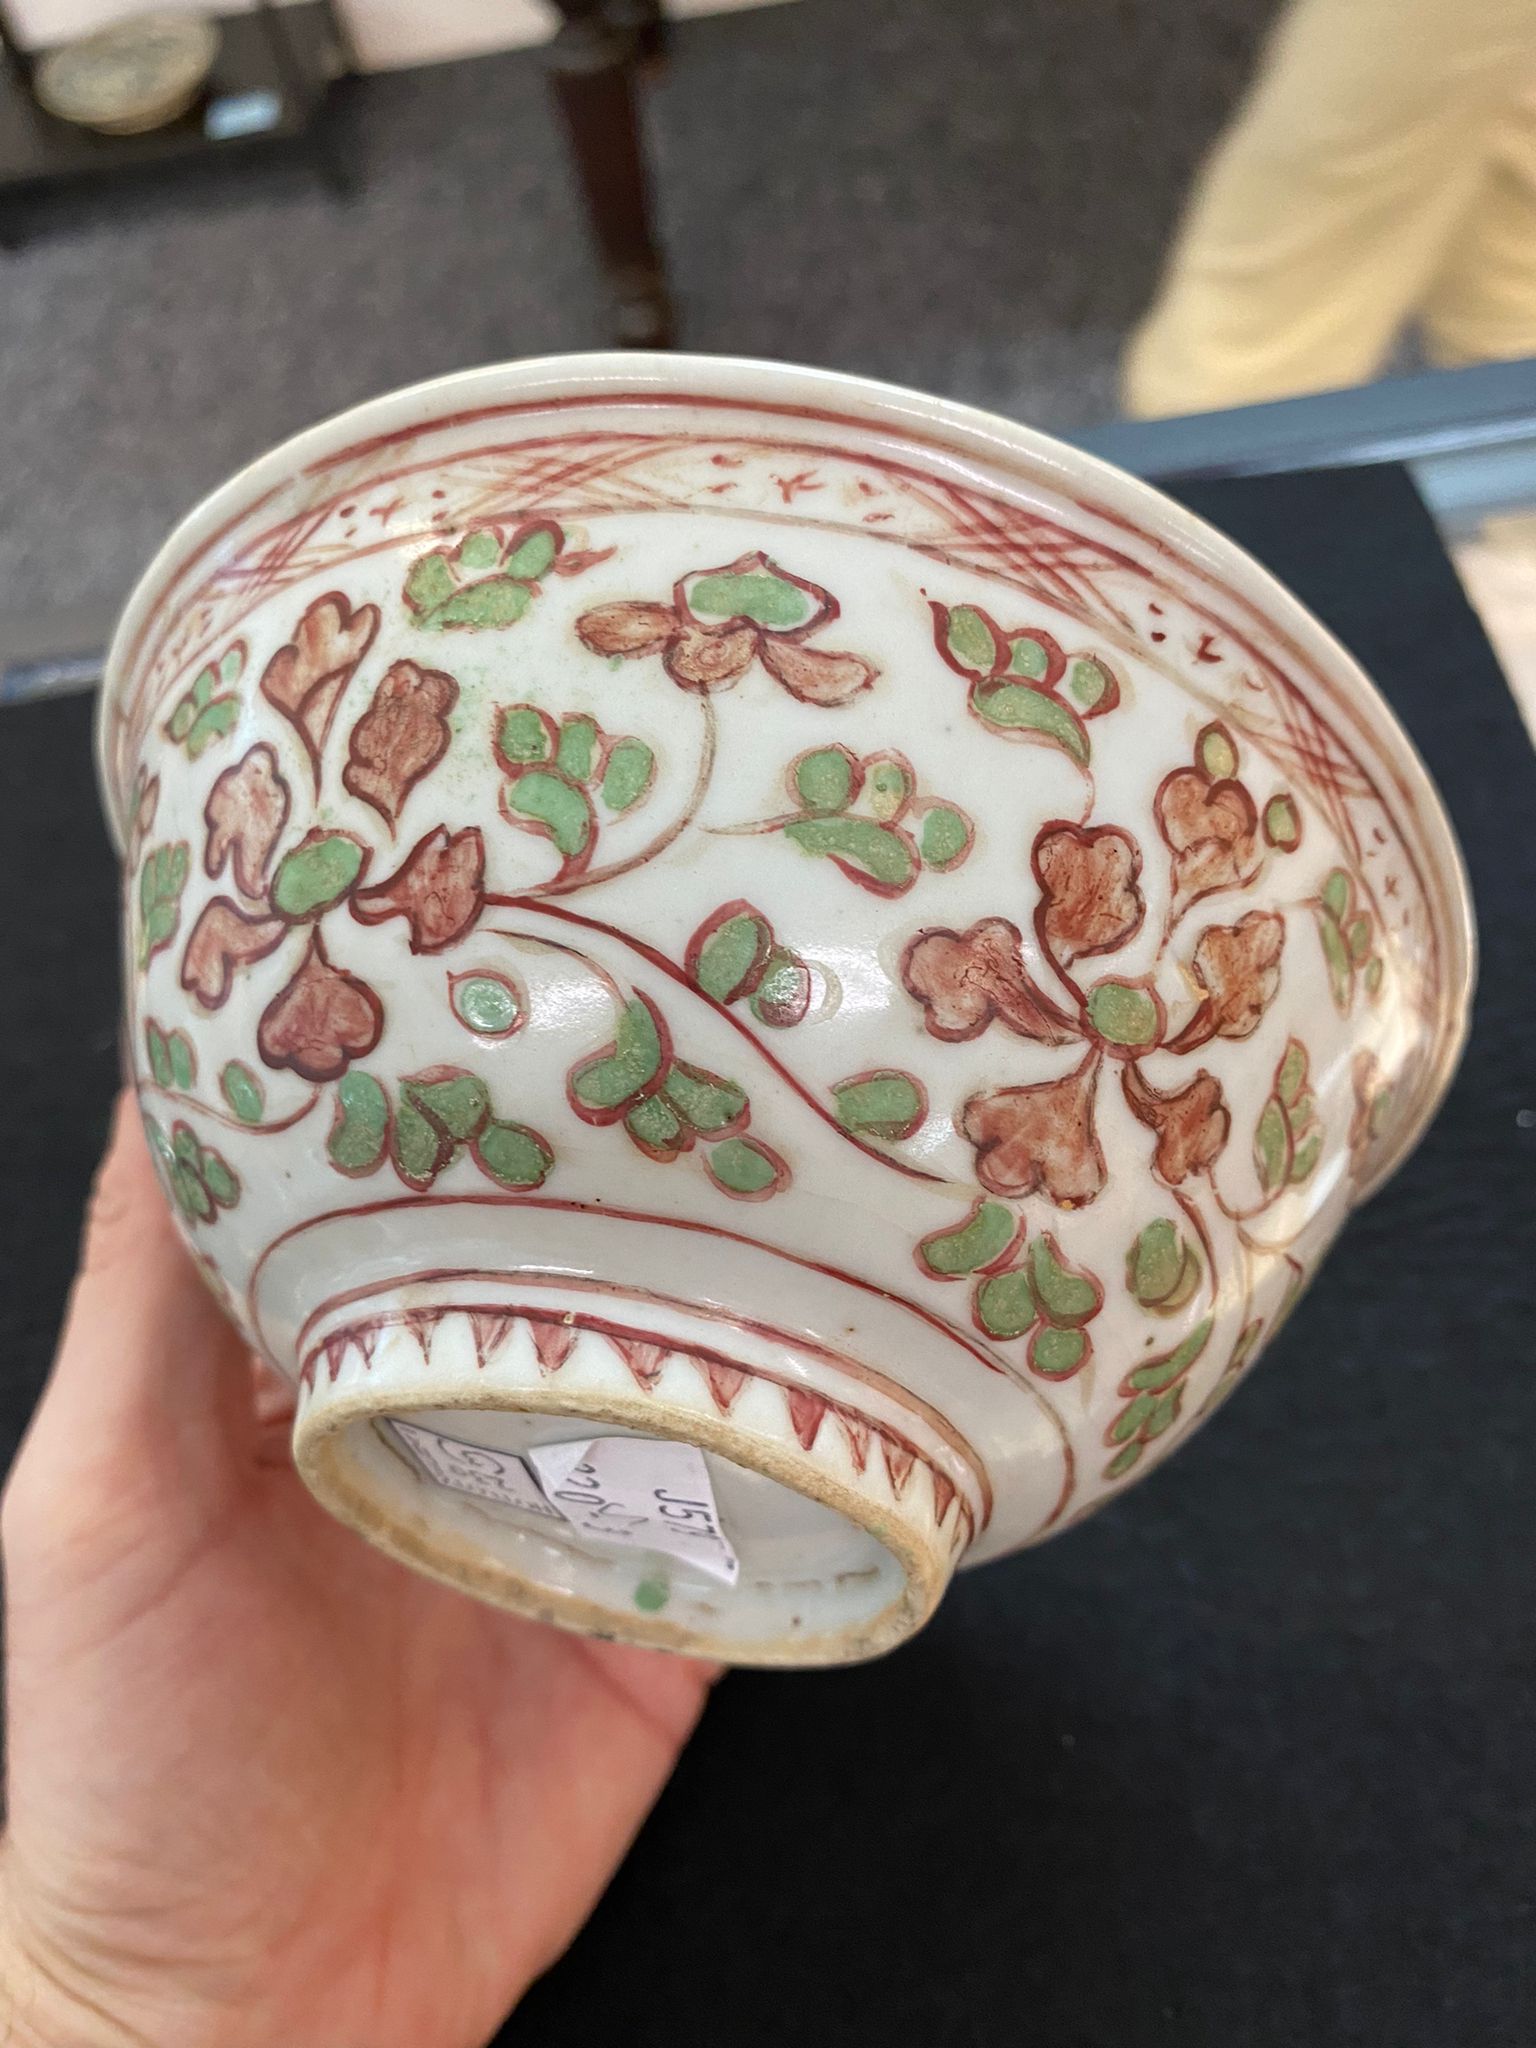 A PAIR OF SWATOW PORCELAIN BOWLS AND A SIMILAR SAUCER - Image 15 of 15